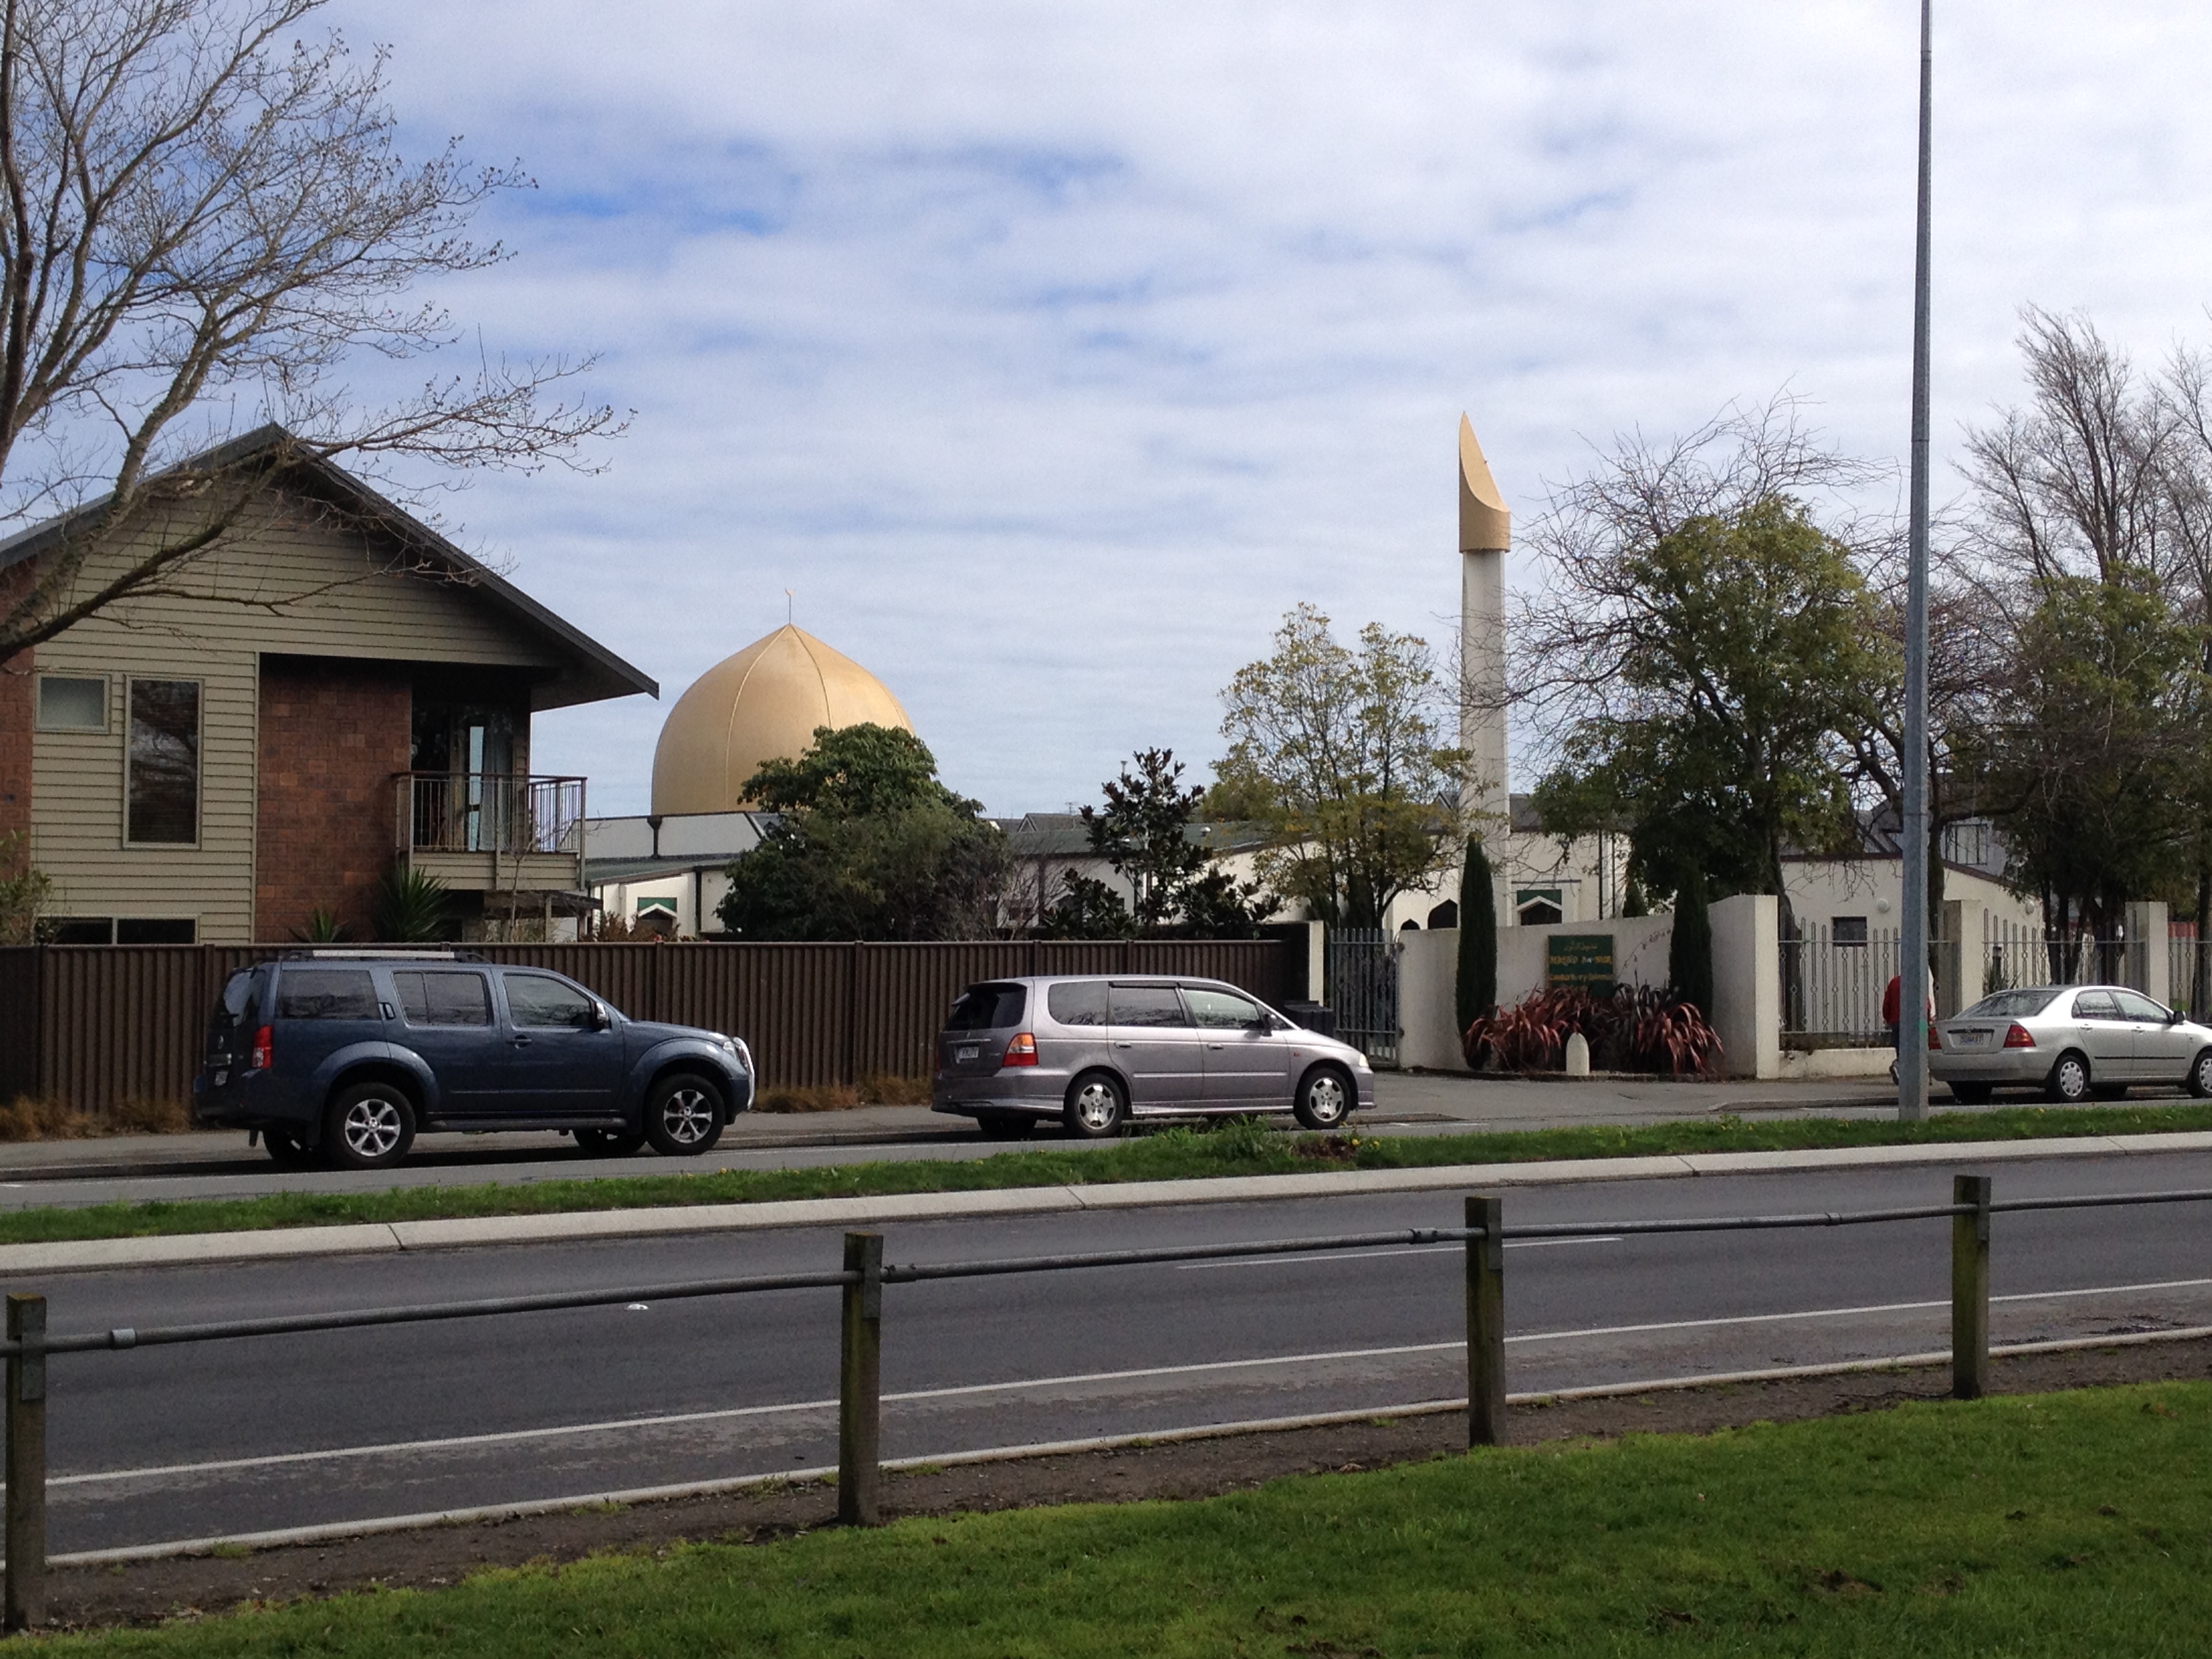 Christchurch mosques face sharp shortfall in visitors after deadly attack